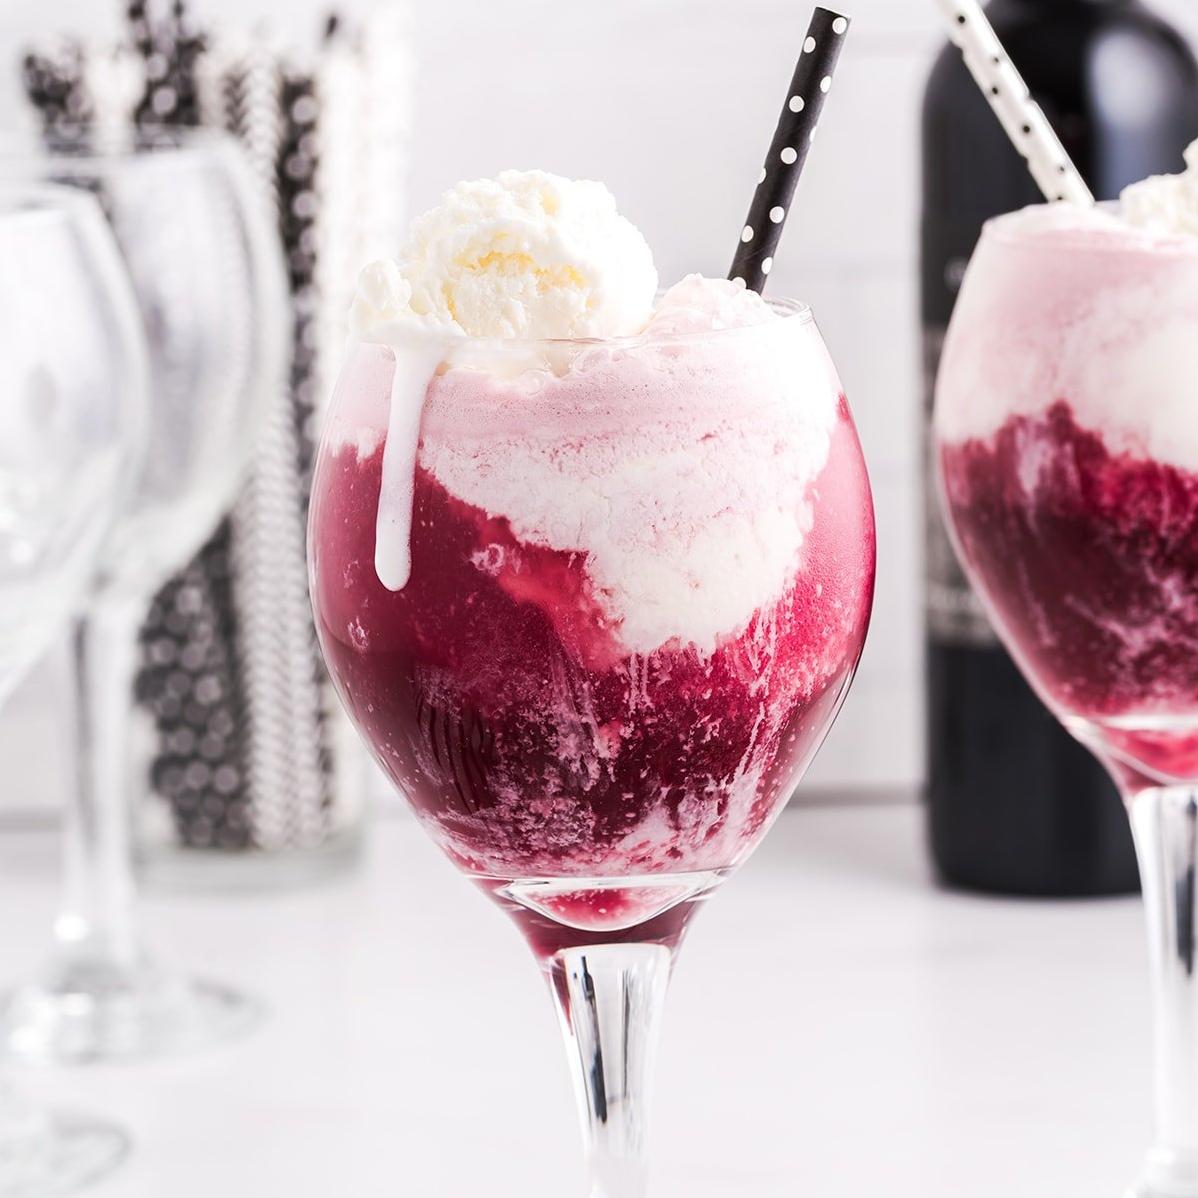  Chill out with this refreshing wine ice recipe!